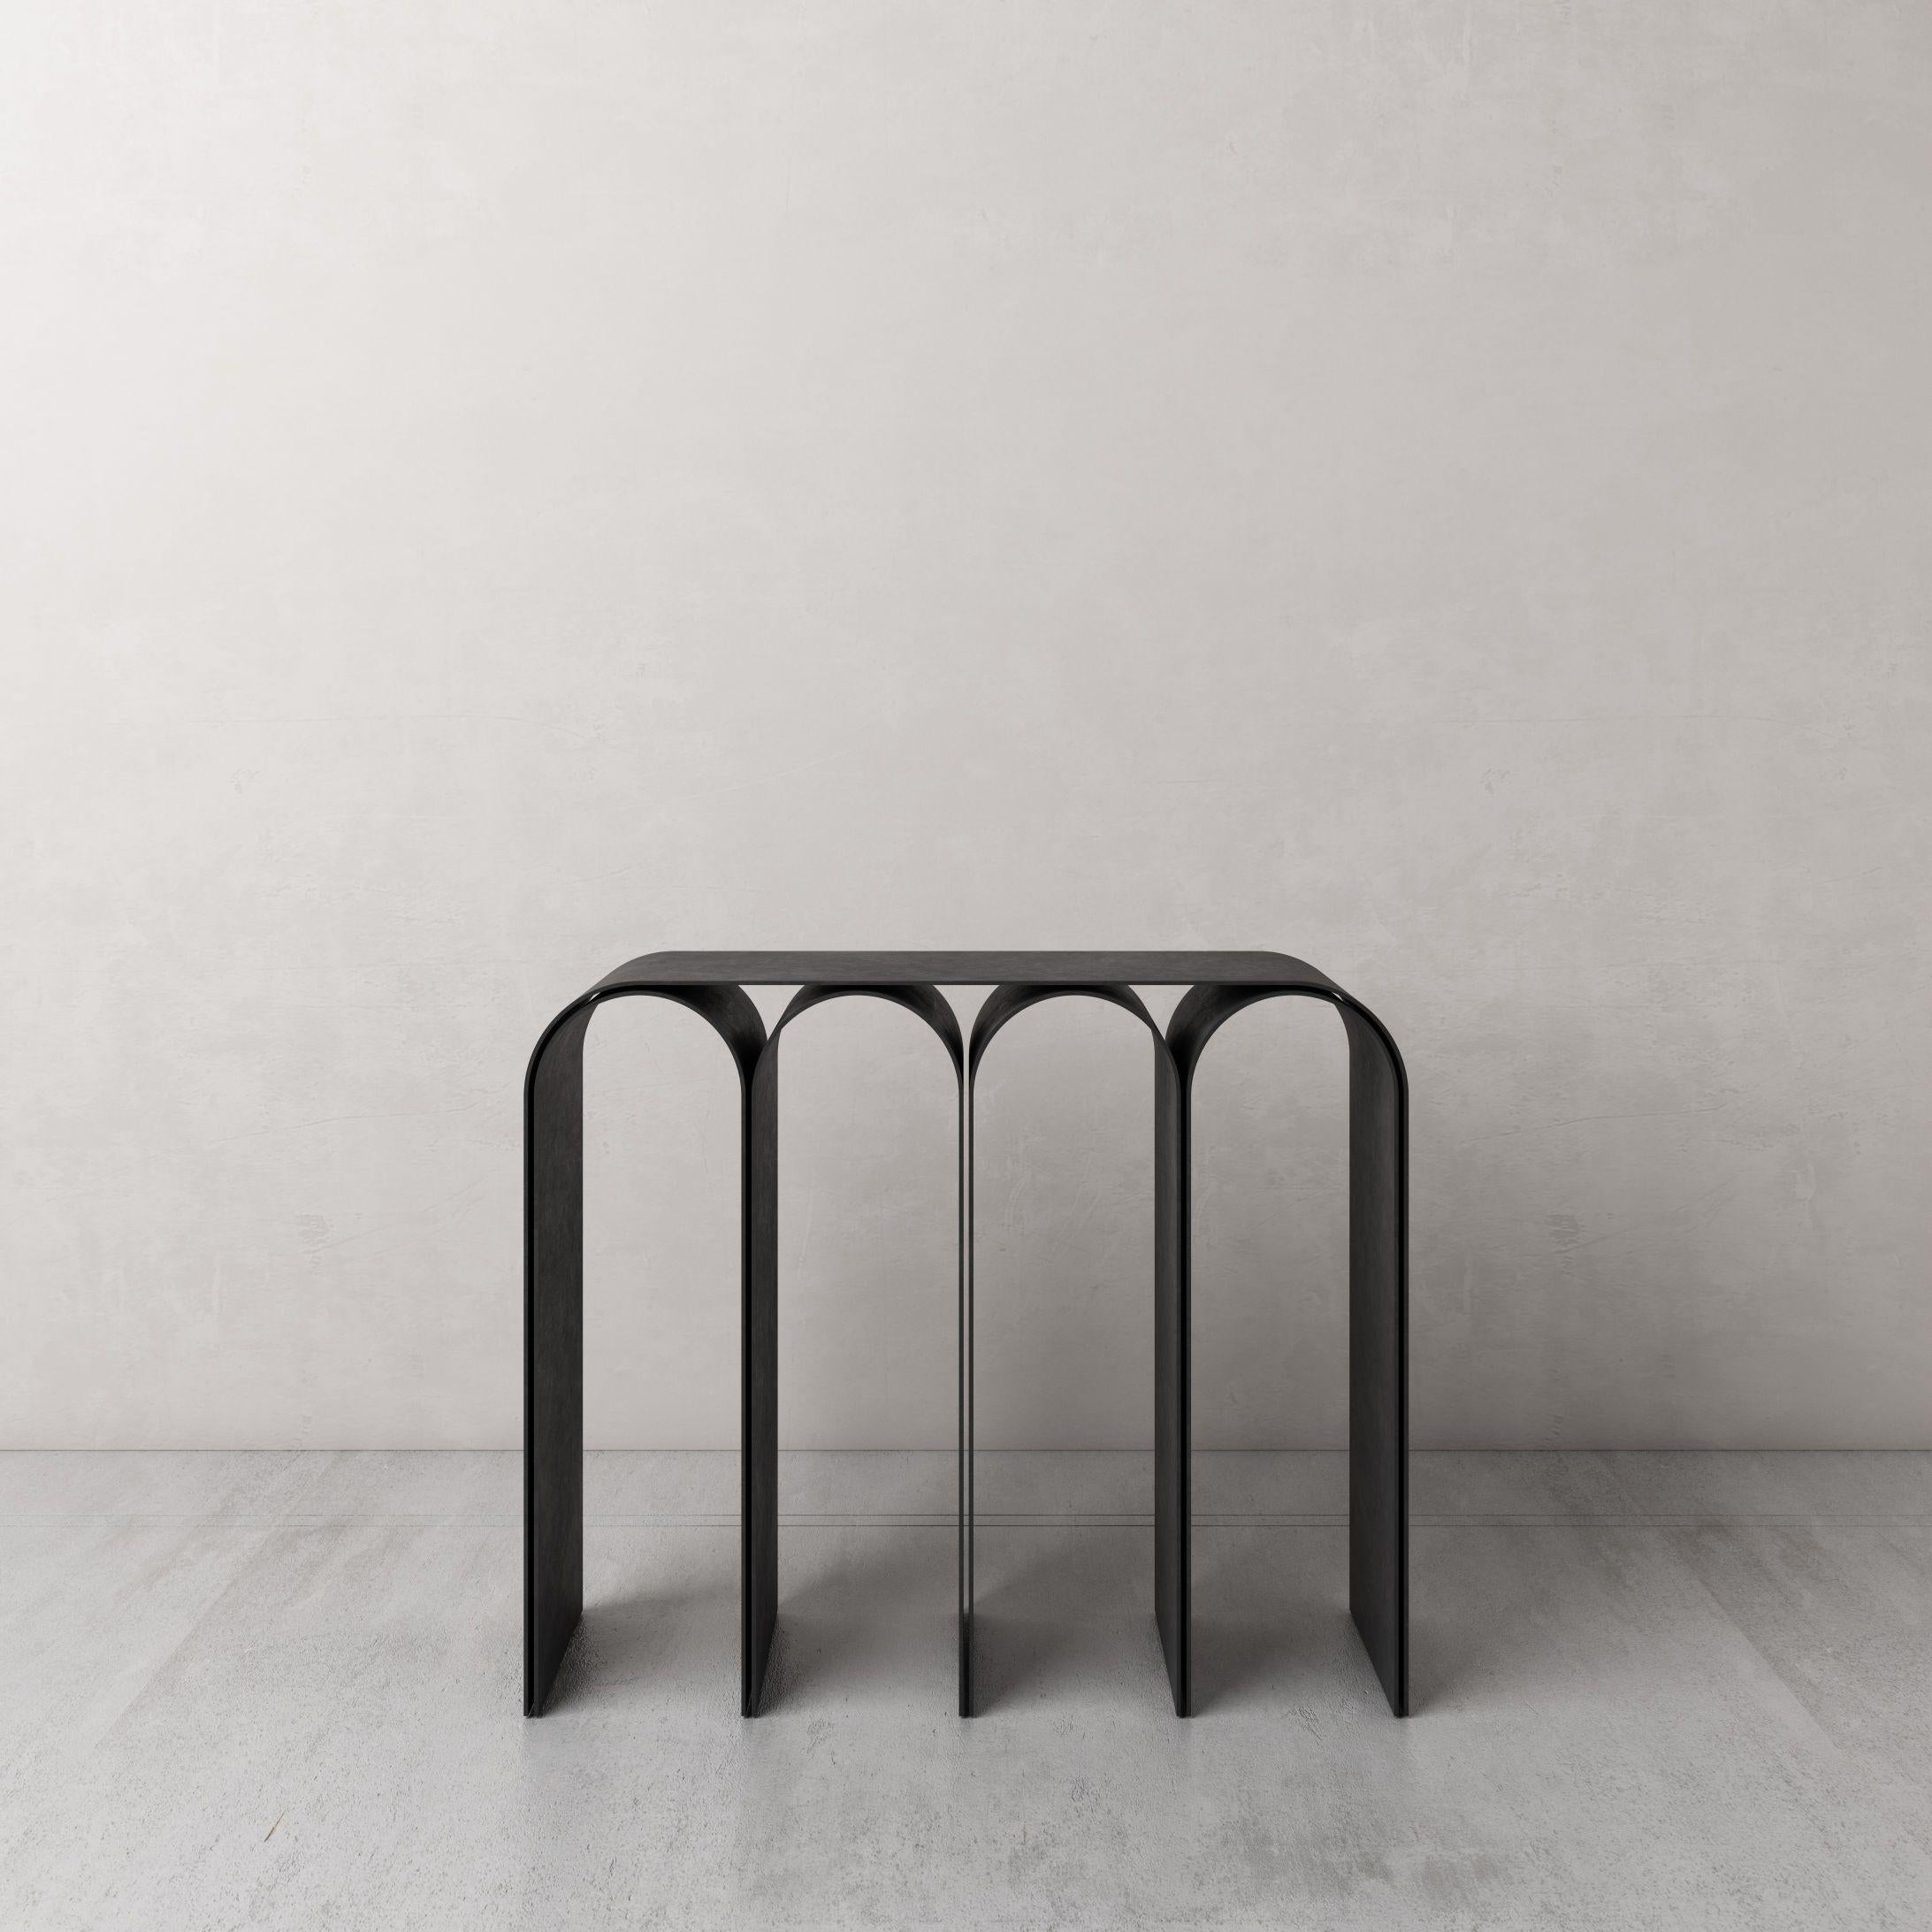 Gold arch console by Pietro Franceschini
Sold exclusively by Galerie Philia
Manufacturer: Prinzivalli
Dimensions: W 103 x L 30 x H 86 cm
Materials: Steel (Black finish)

Available finishes:
Steel (black, white, brass finish)
Aluminum (silver